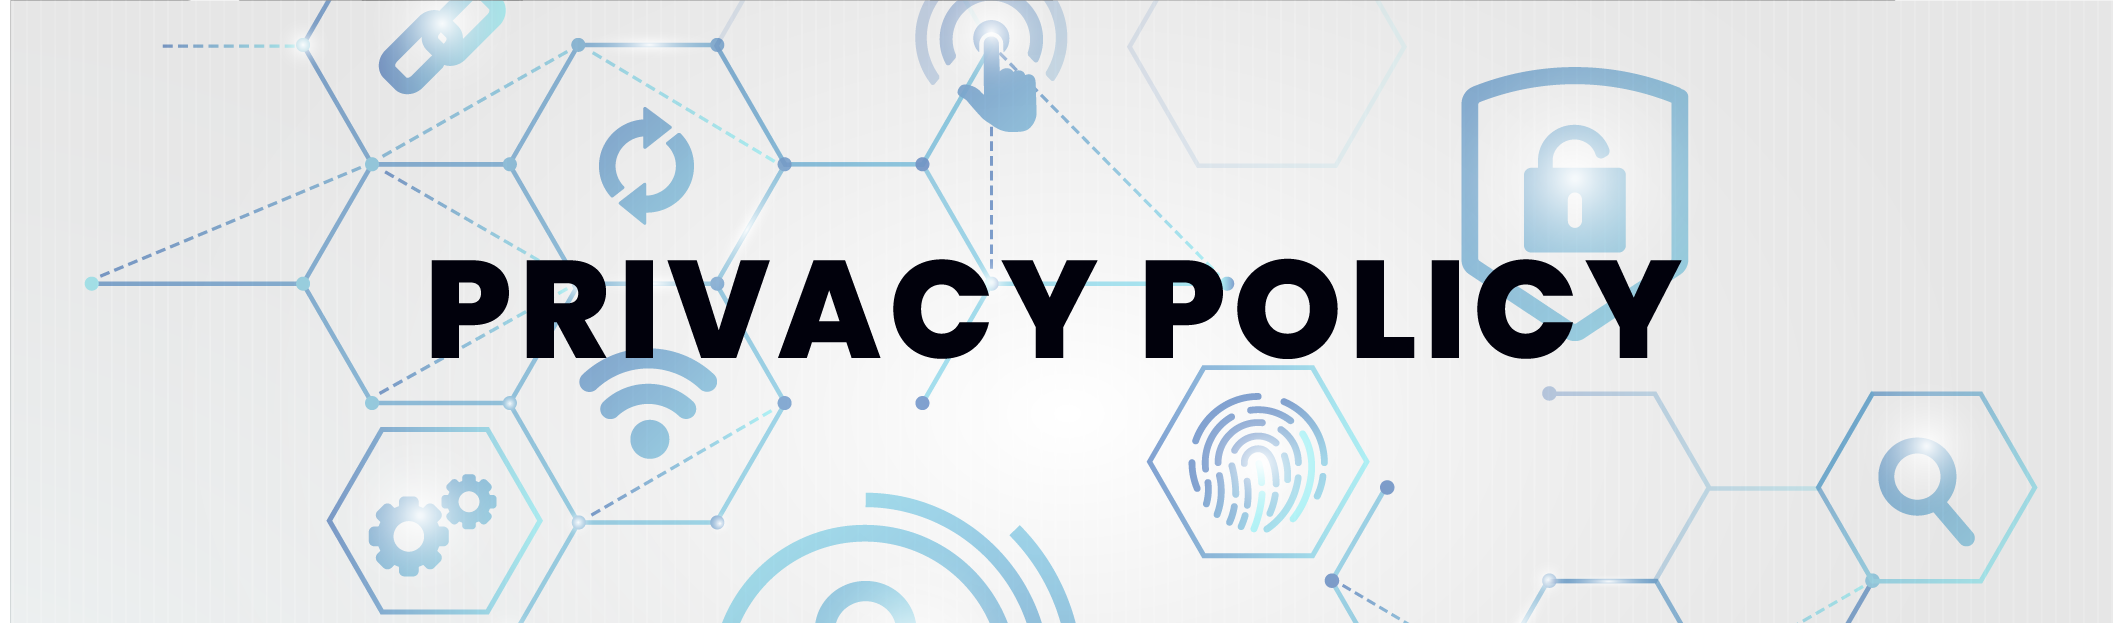 privacy policy banner imagery